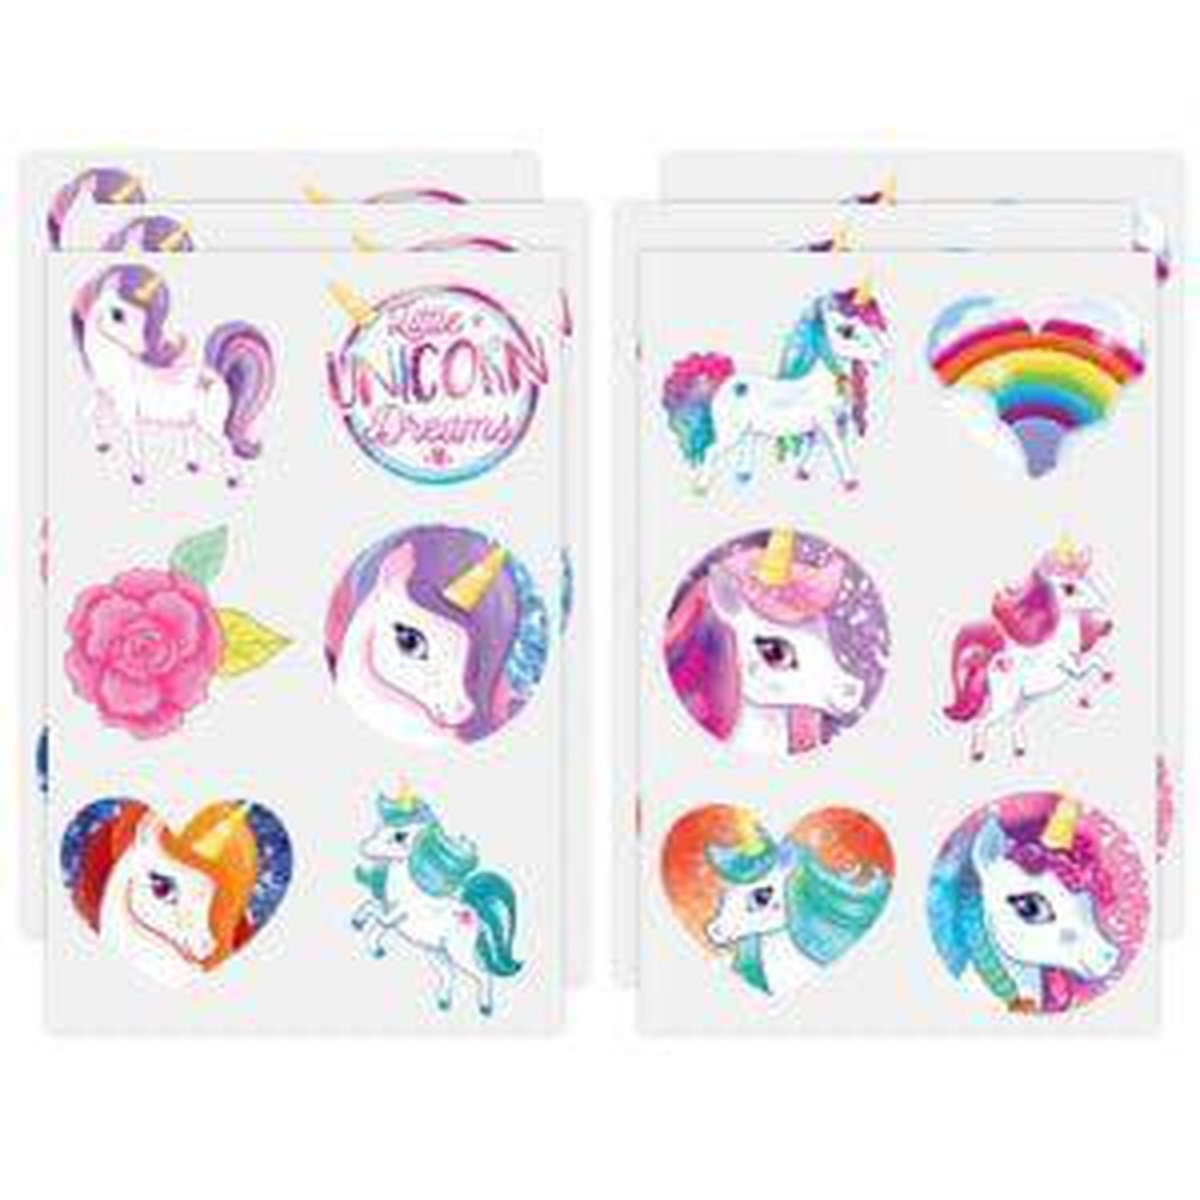 Unicorn Tattoo Sheets(Each Sheet Contains 6 Tattoos) - Kids Party Craft